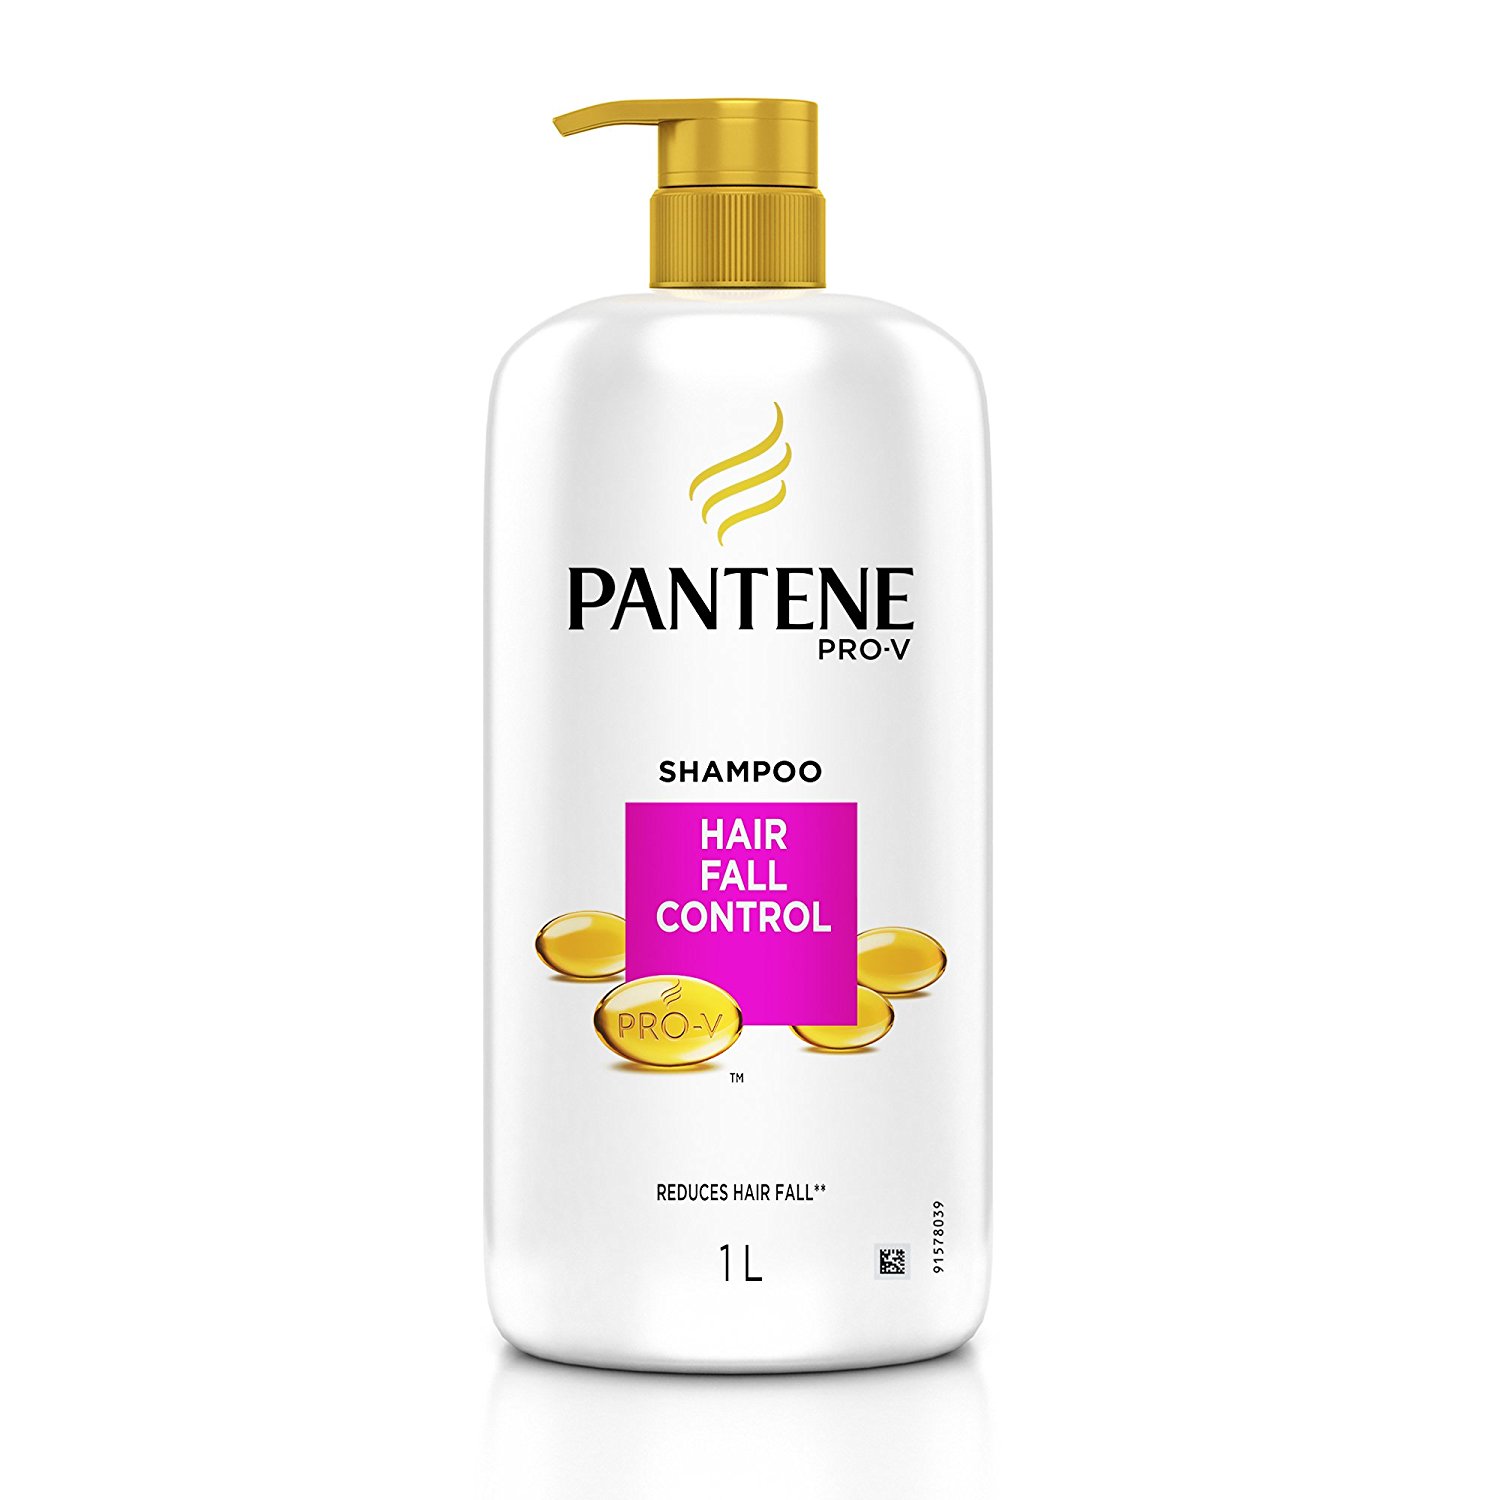 Amazon Offers – Pantene Hair Fall Control Shampoo, 1L at 45% Off